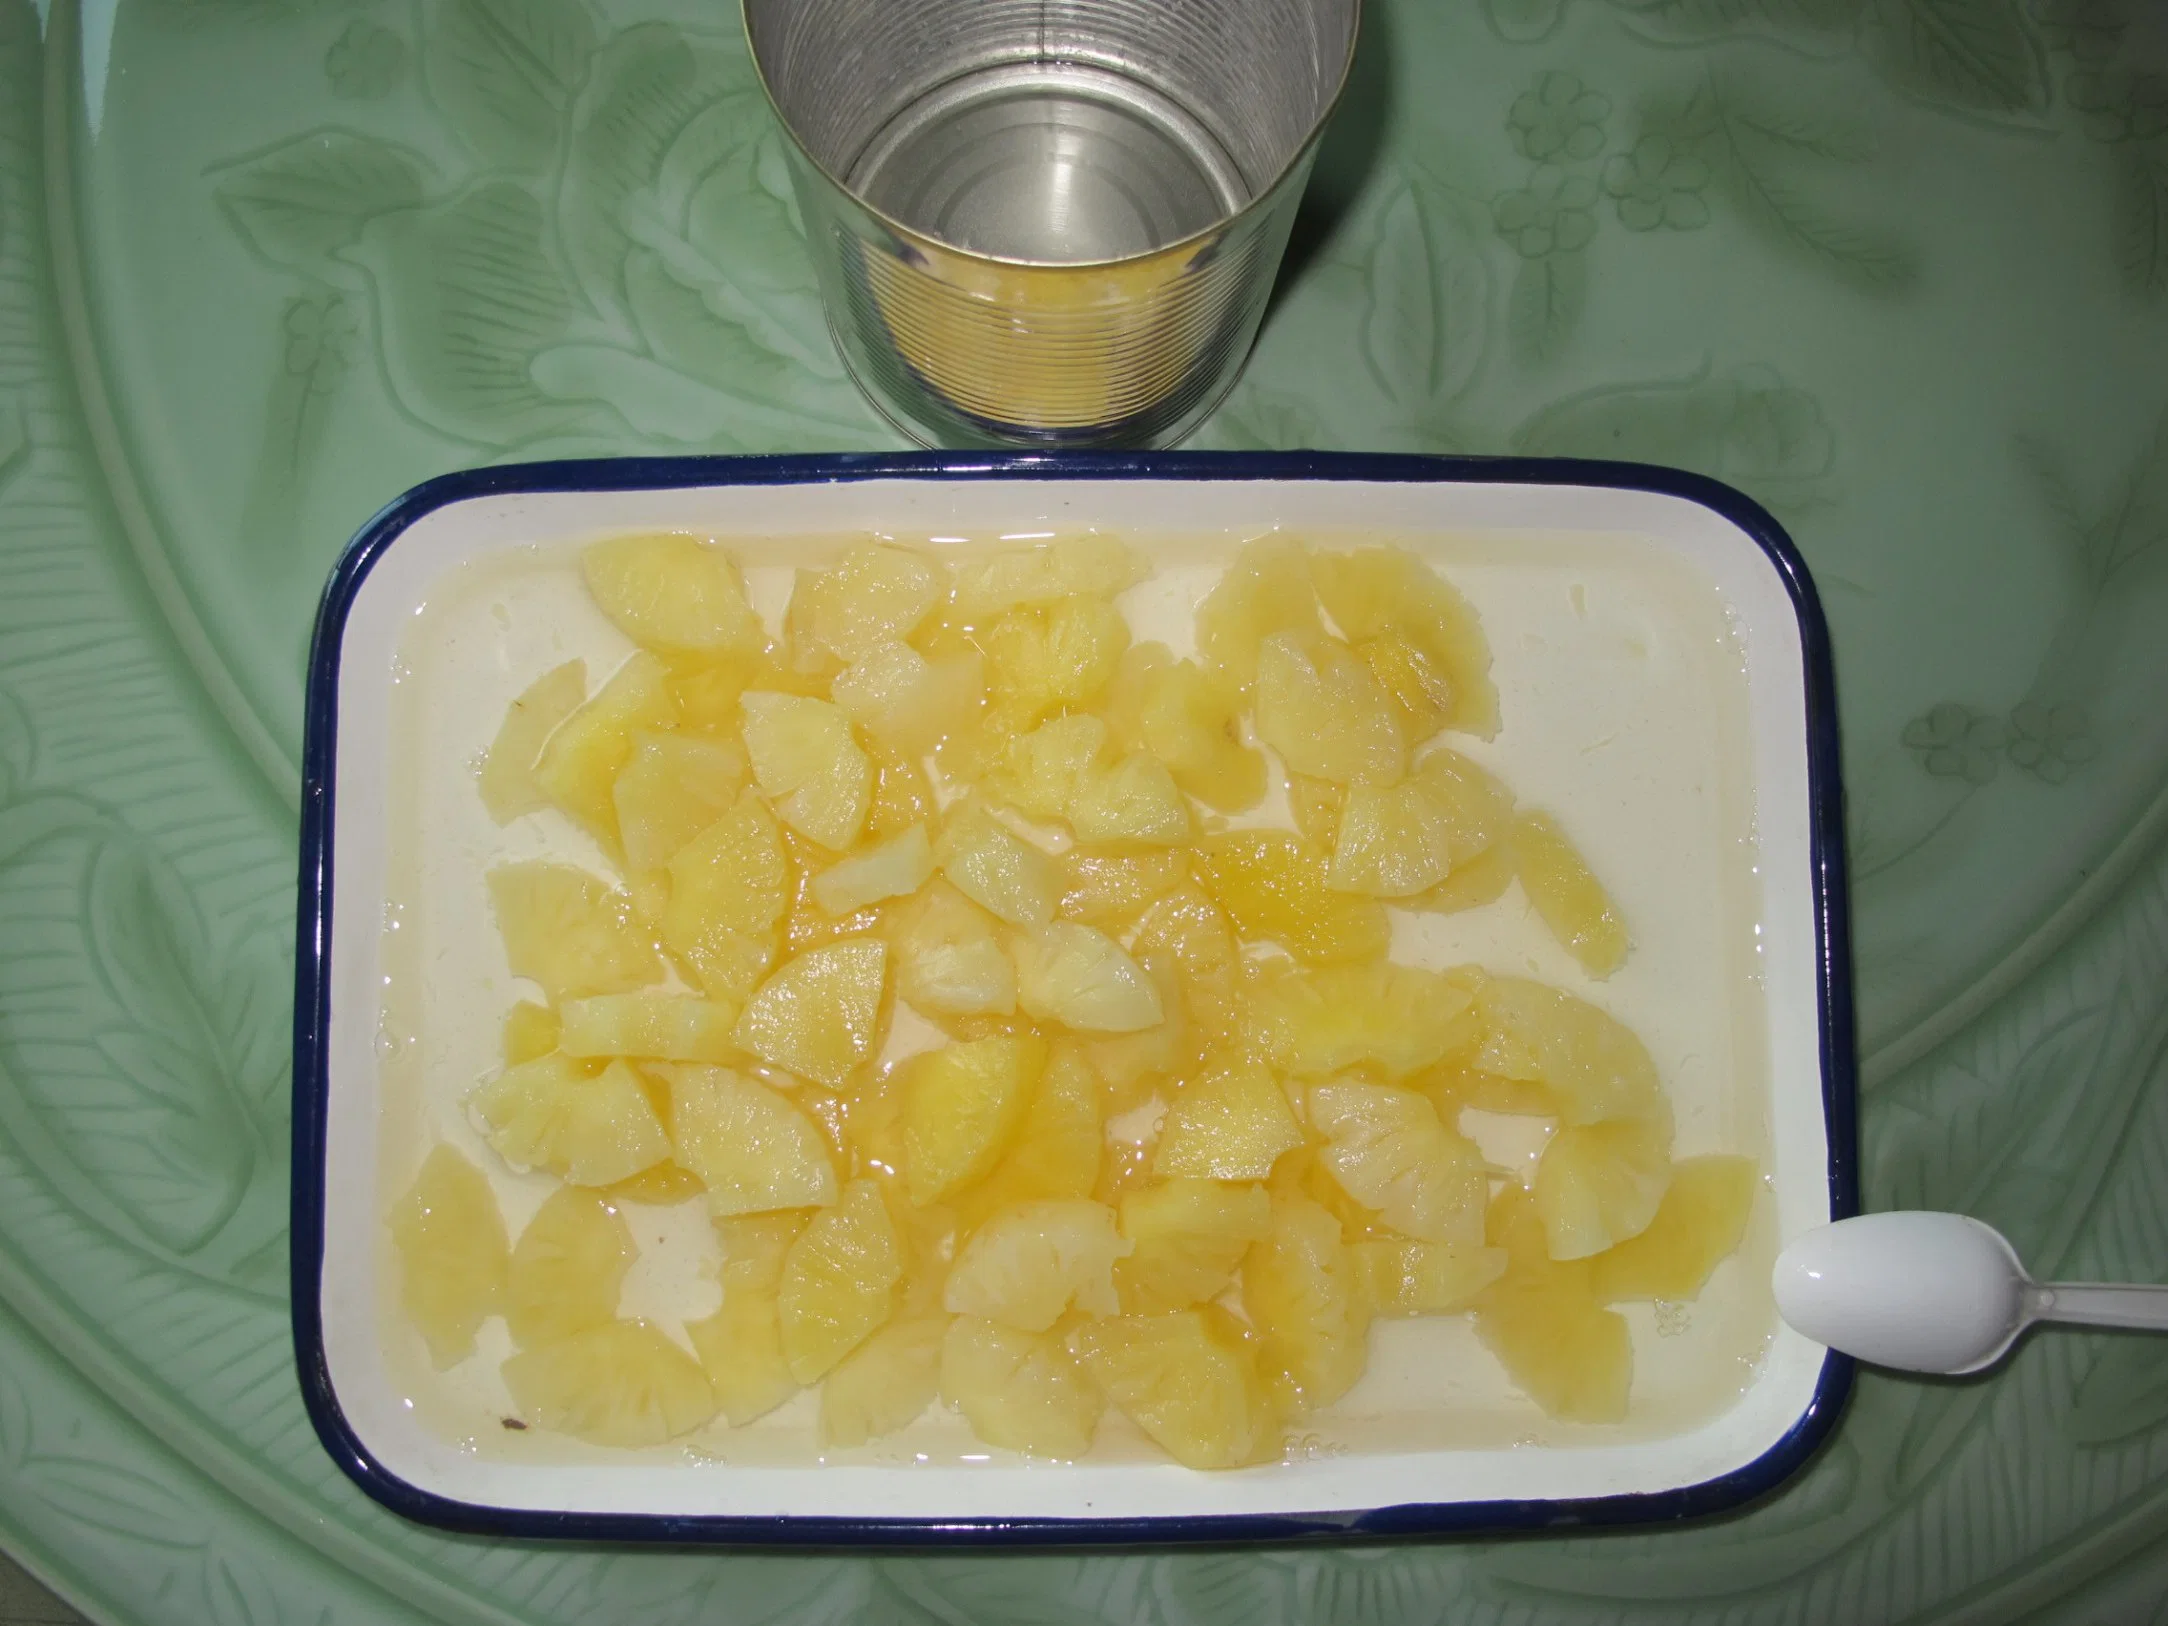 Canned Pineapple Pieces Fruit 850g in Lt. Syrup